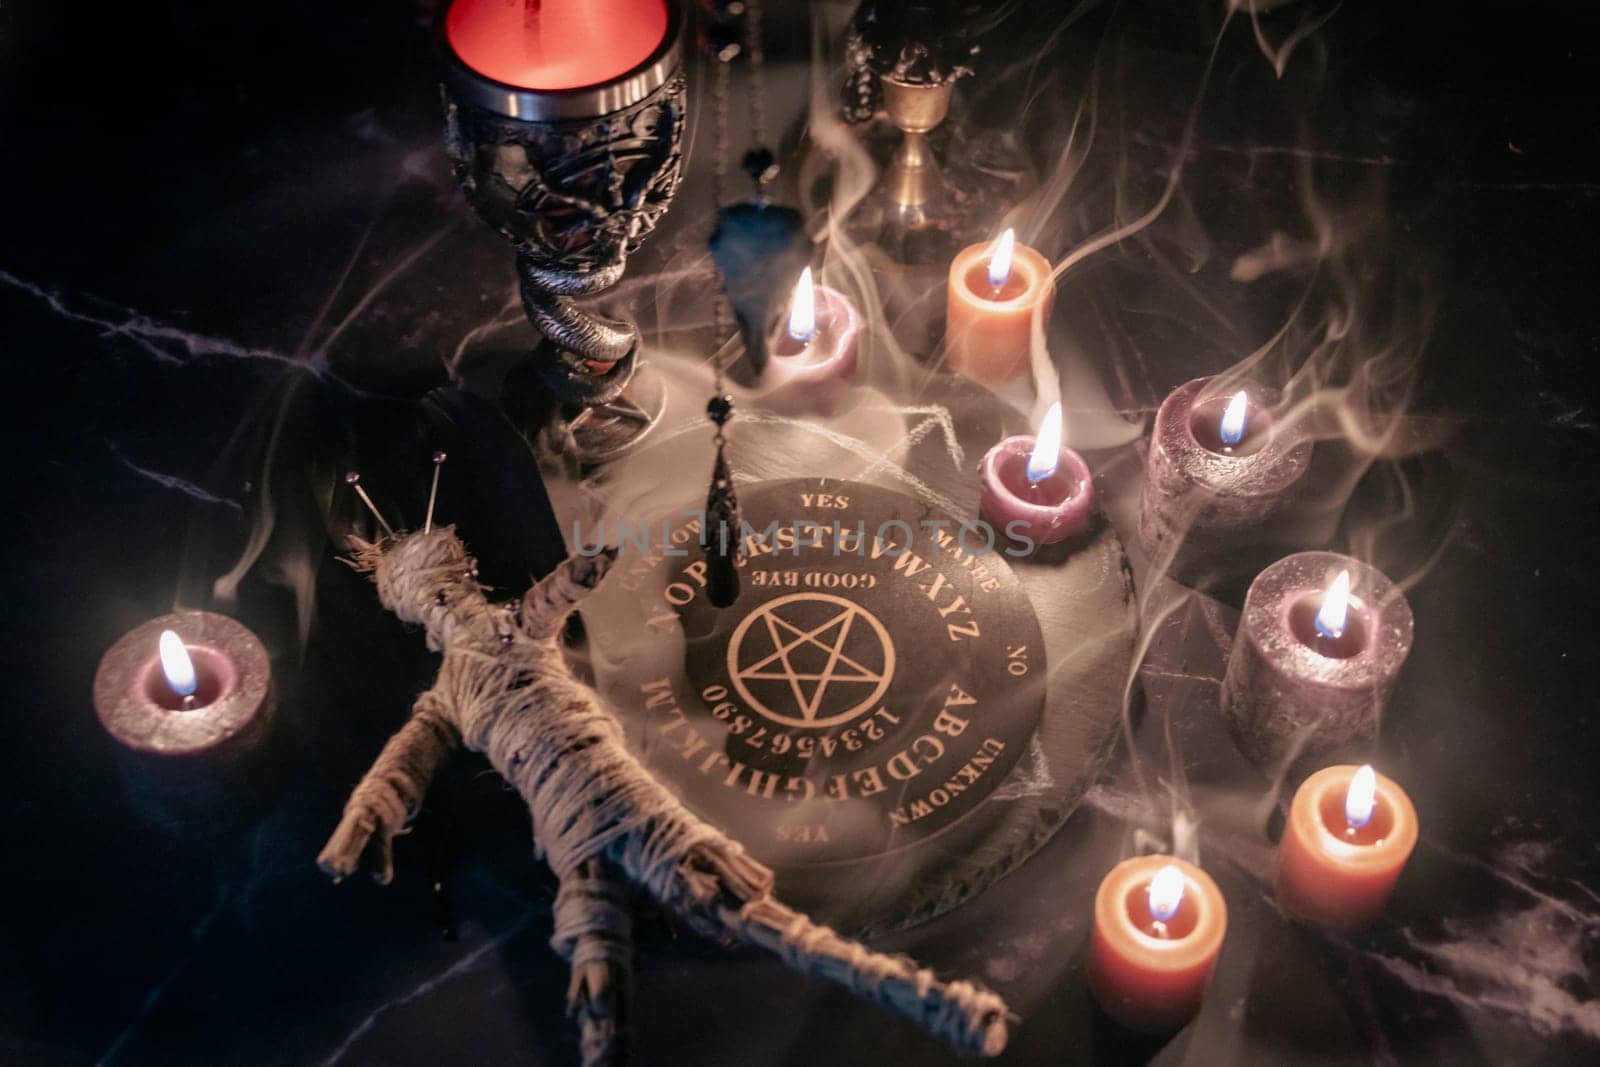 A haunting occult setup featuring a pendulum, mystical symbols, candles, a voodoo doll, and a ritual goblet amidst swirling smoke. by jbruiz78